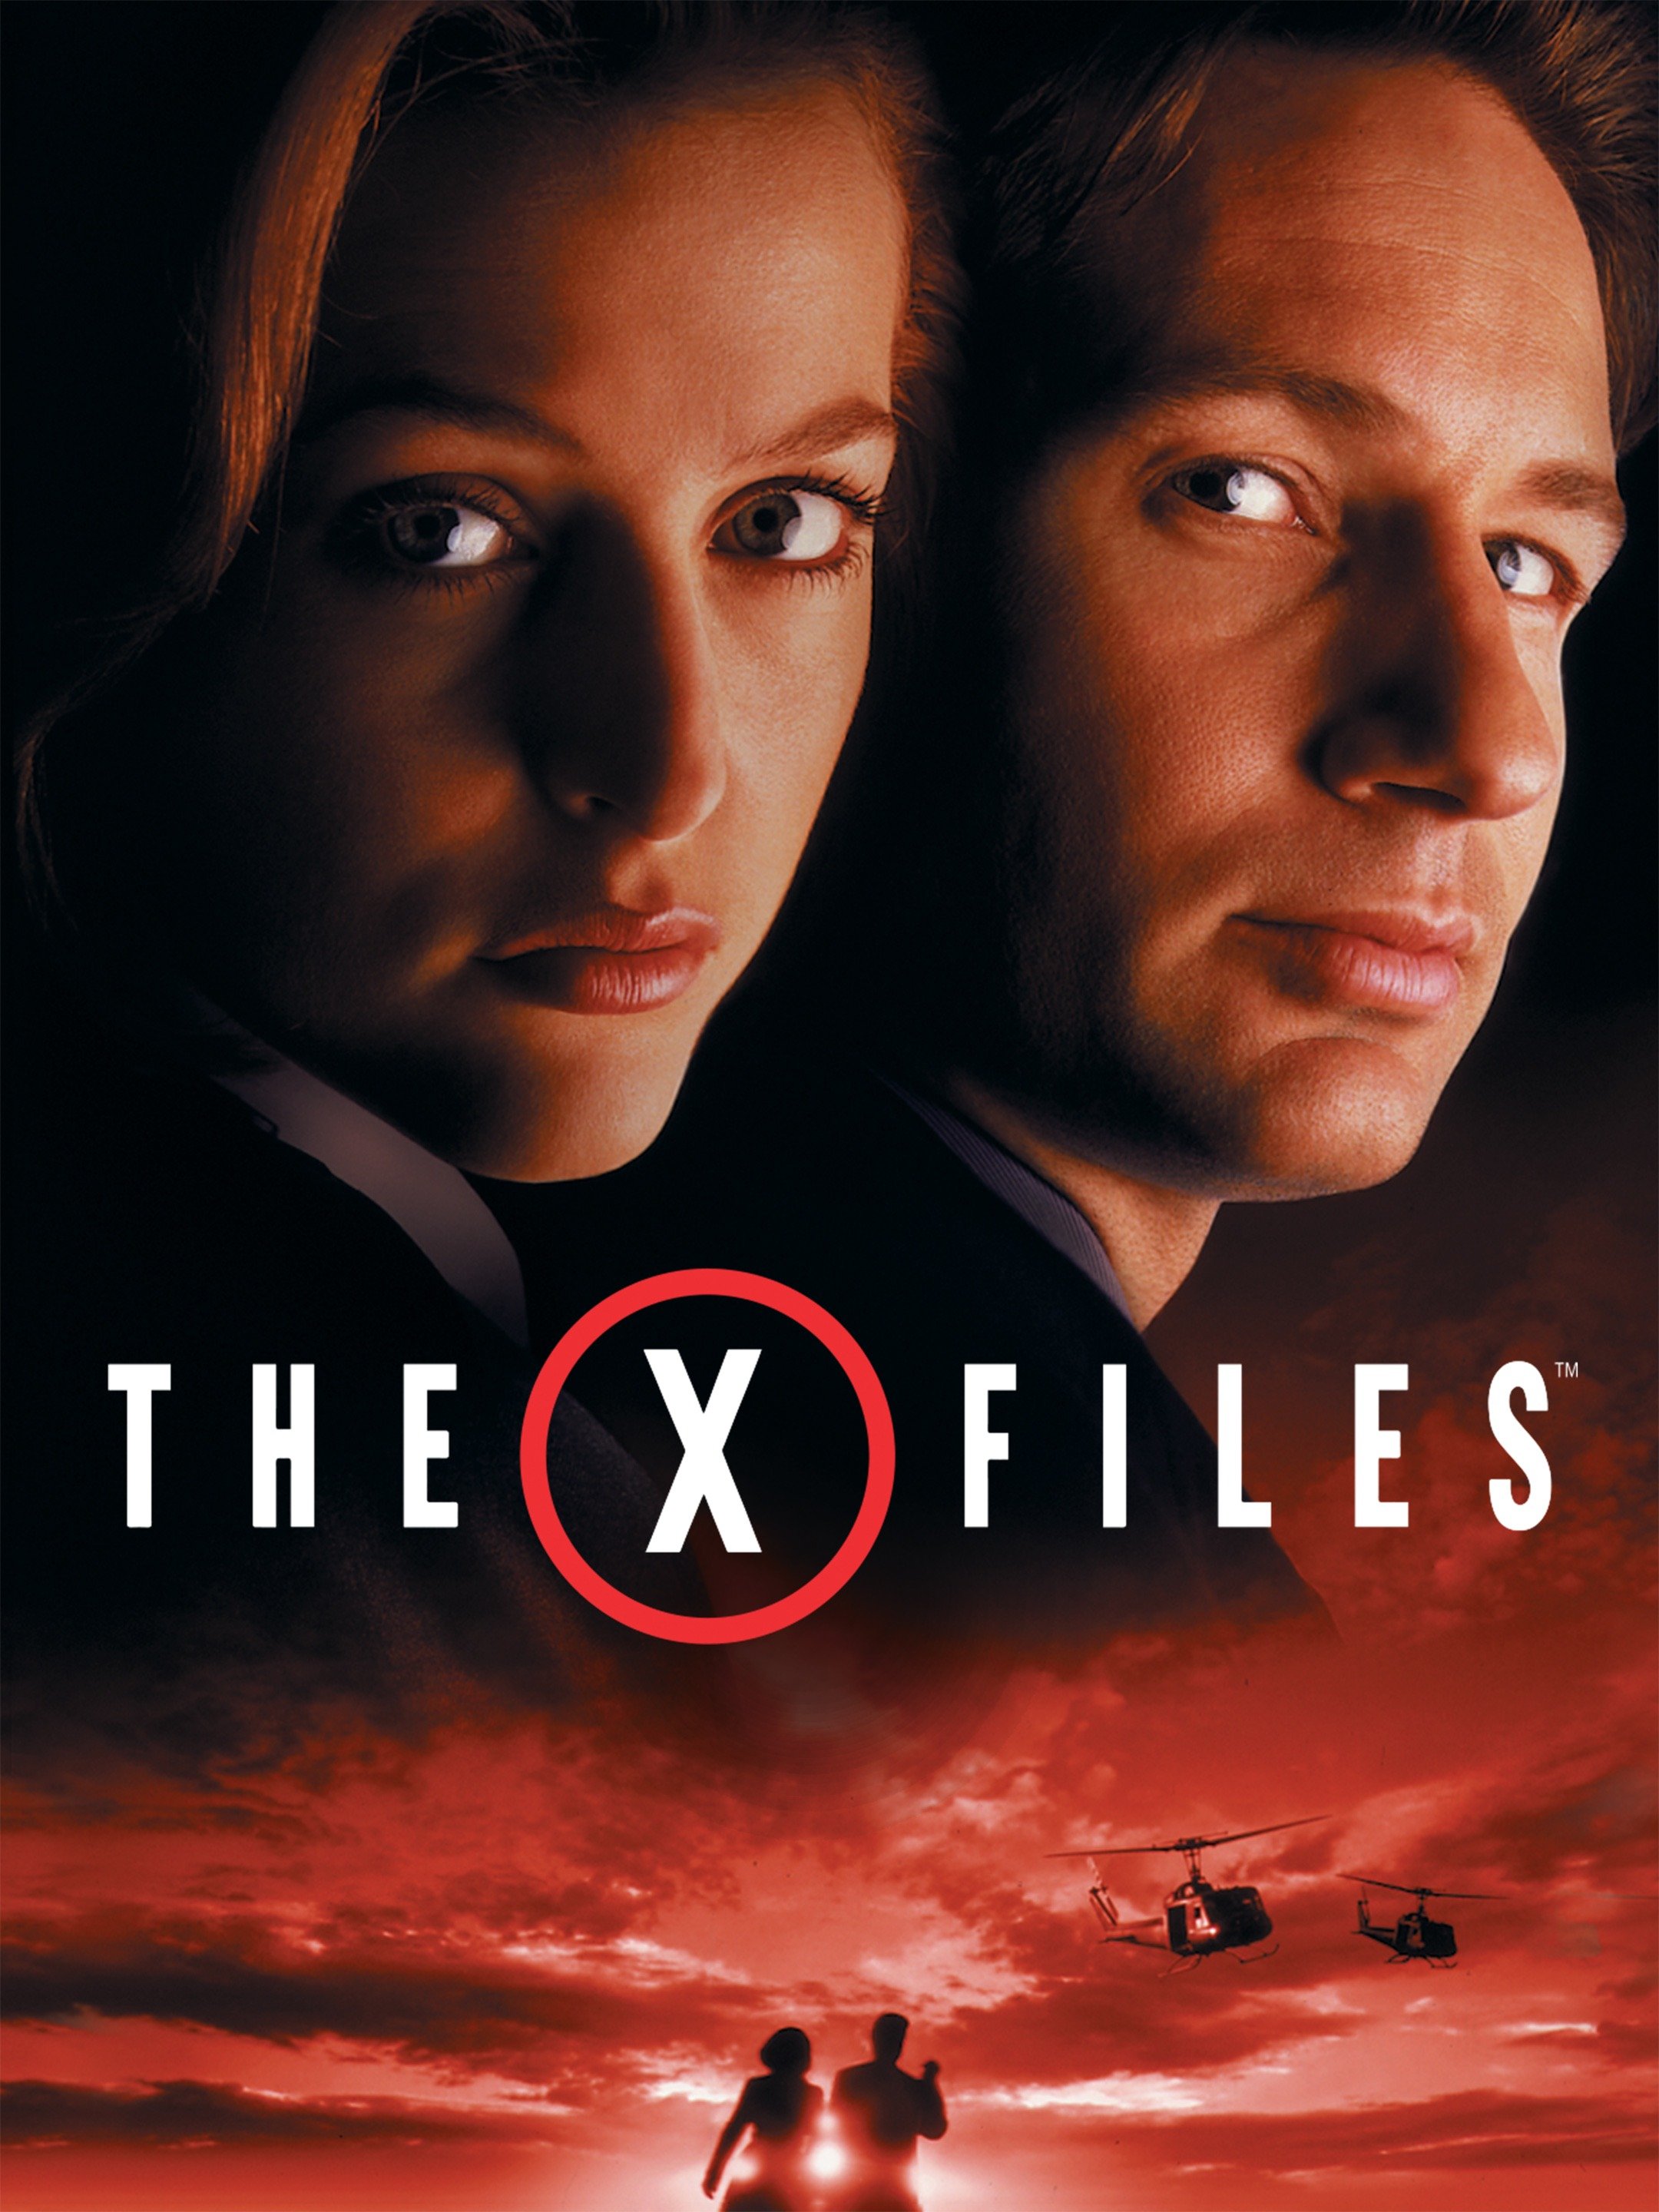 image for the x-files